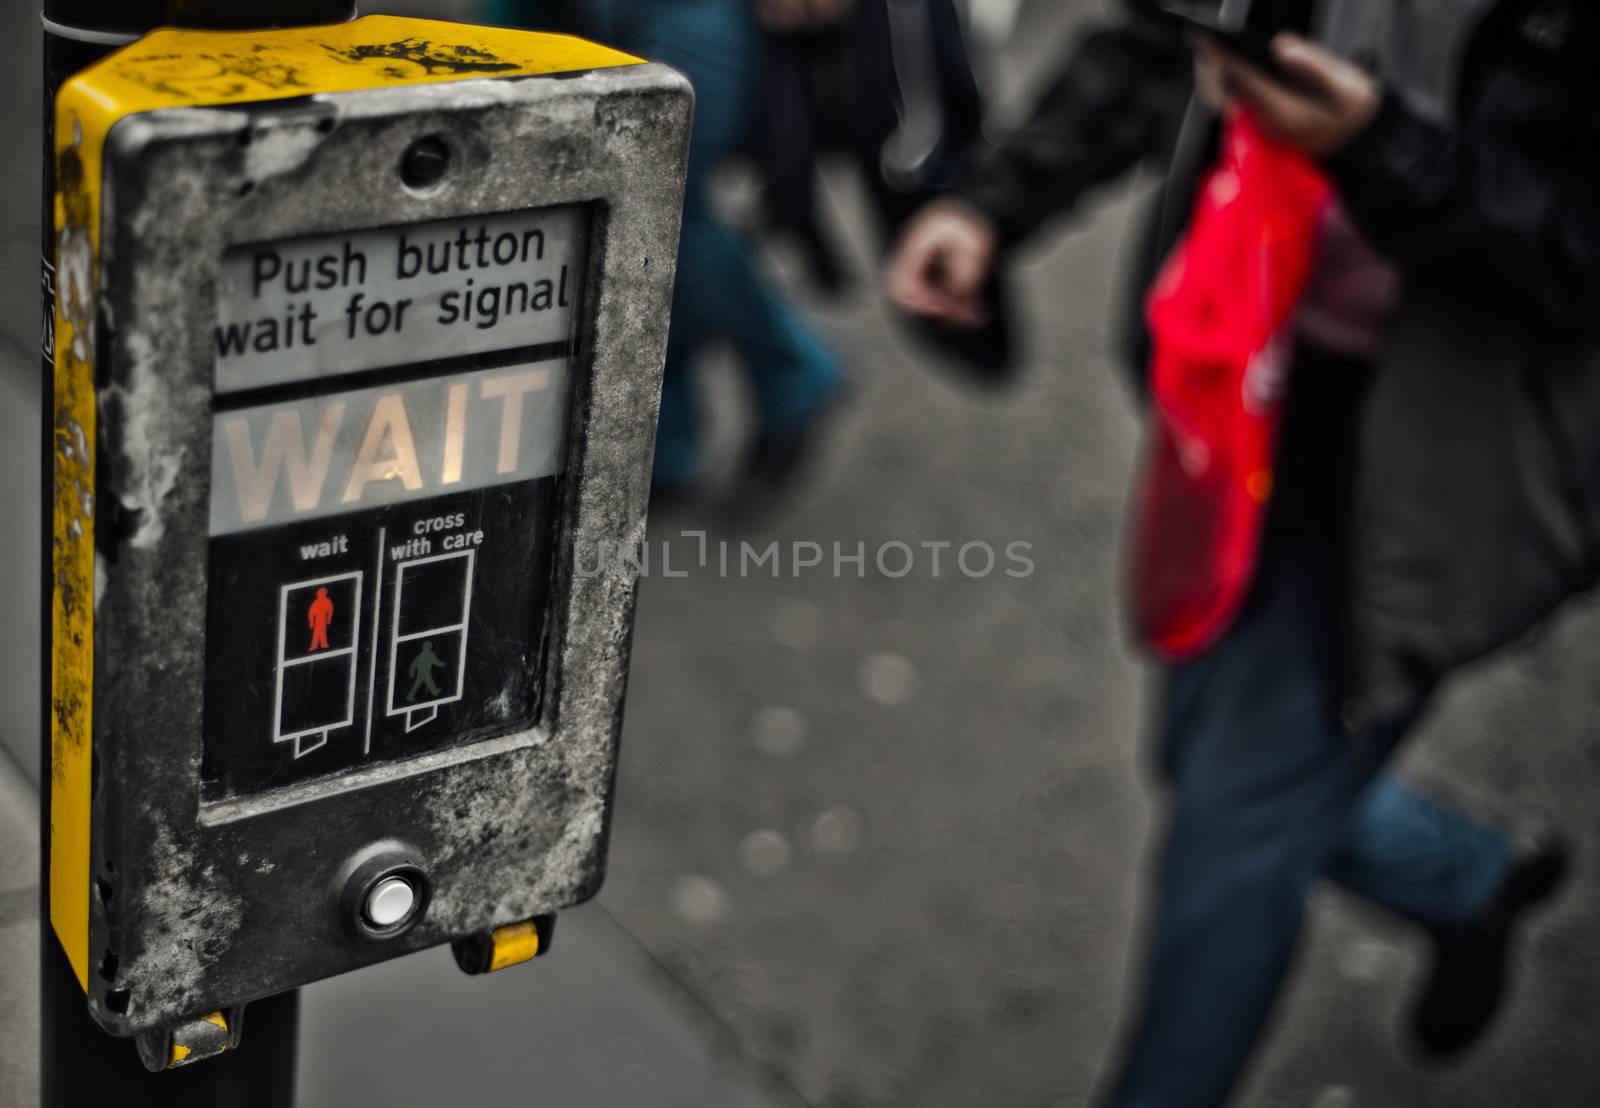 Grungy Urban City Scene Of People Crossing A Street In The UK With Copy Space